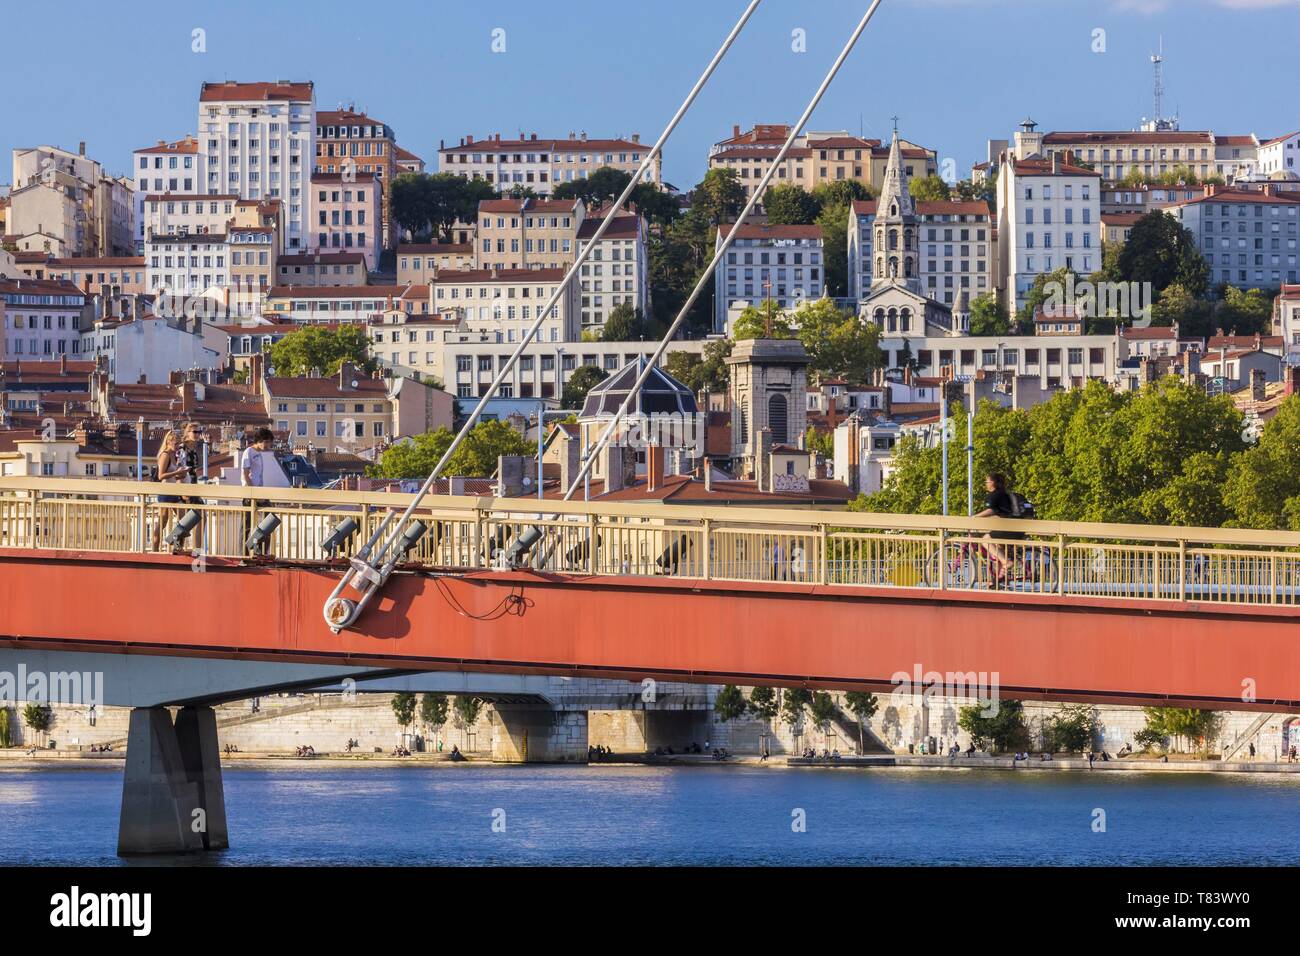 France, Rhone, Lyon, historical site listed as World Heritage by UNESCO, Vieux Lyon (Old Town), footbridge of the Palais de Justice on the Saone river connecting the Cordeliers district to the Vieux Lyon district with a view of the Croix-Rousse district and Bon-Pasteur church Stock Photo